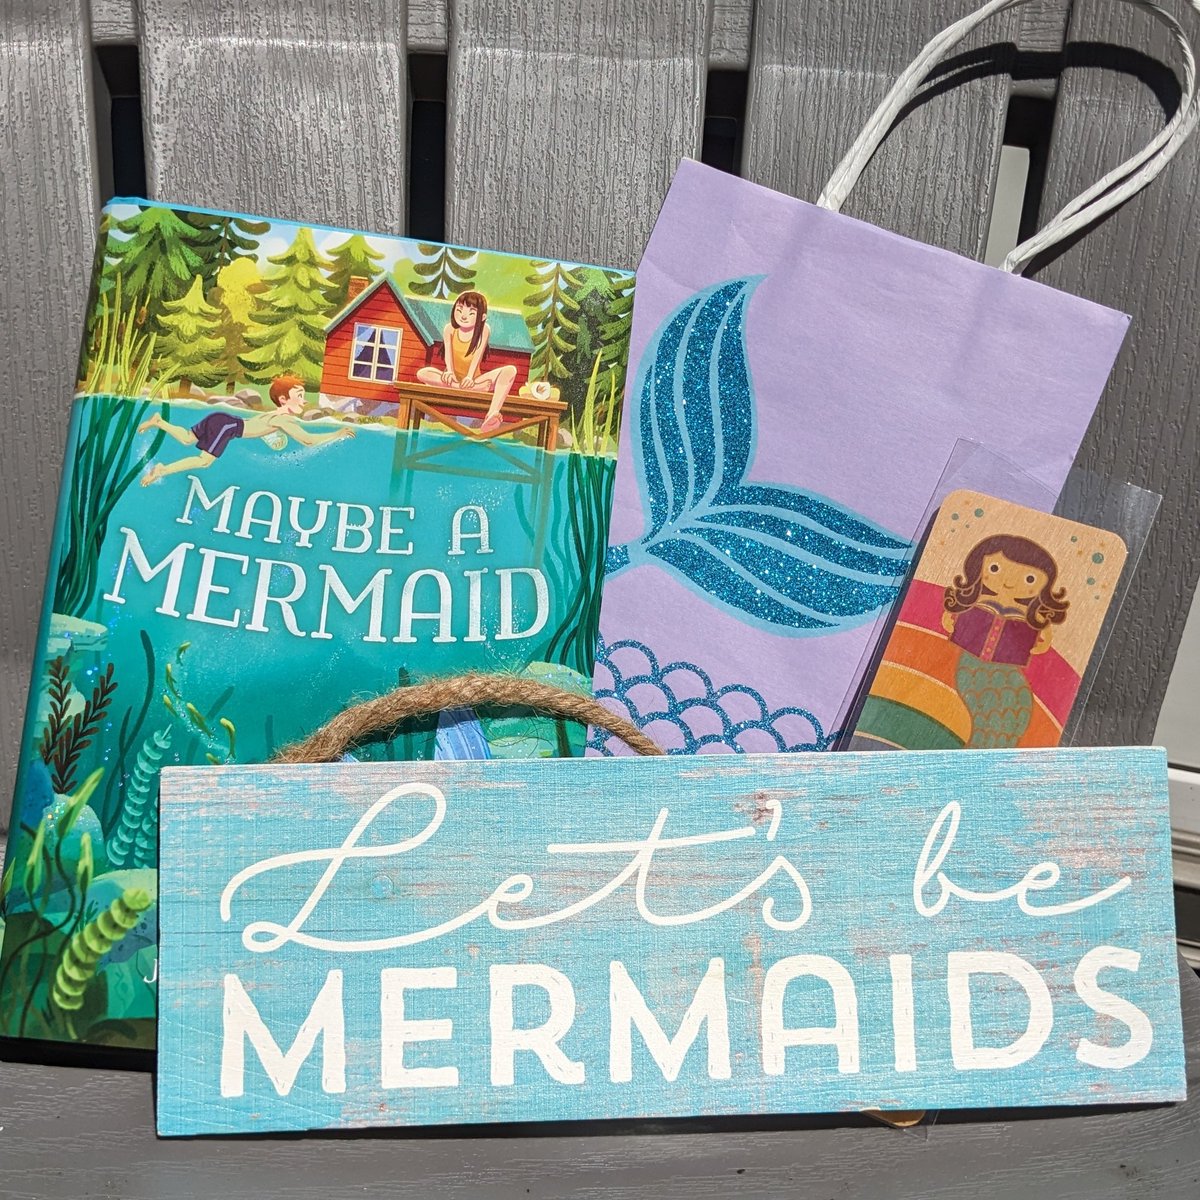 It's sunny and the birds are singing and I'm choosing to ignore the demise of 🐦 and instead celebrate summer with a joyful #kidlit #giveaway. If you're still here, too, RT & follow by 5pm EST on Sun 7/30 for a chance to win a book & some #Mermaid swag! US only. 💙🧜‍♀️🧜‍♂️